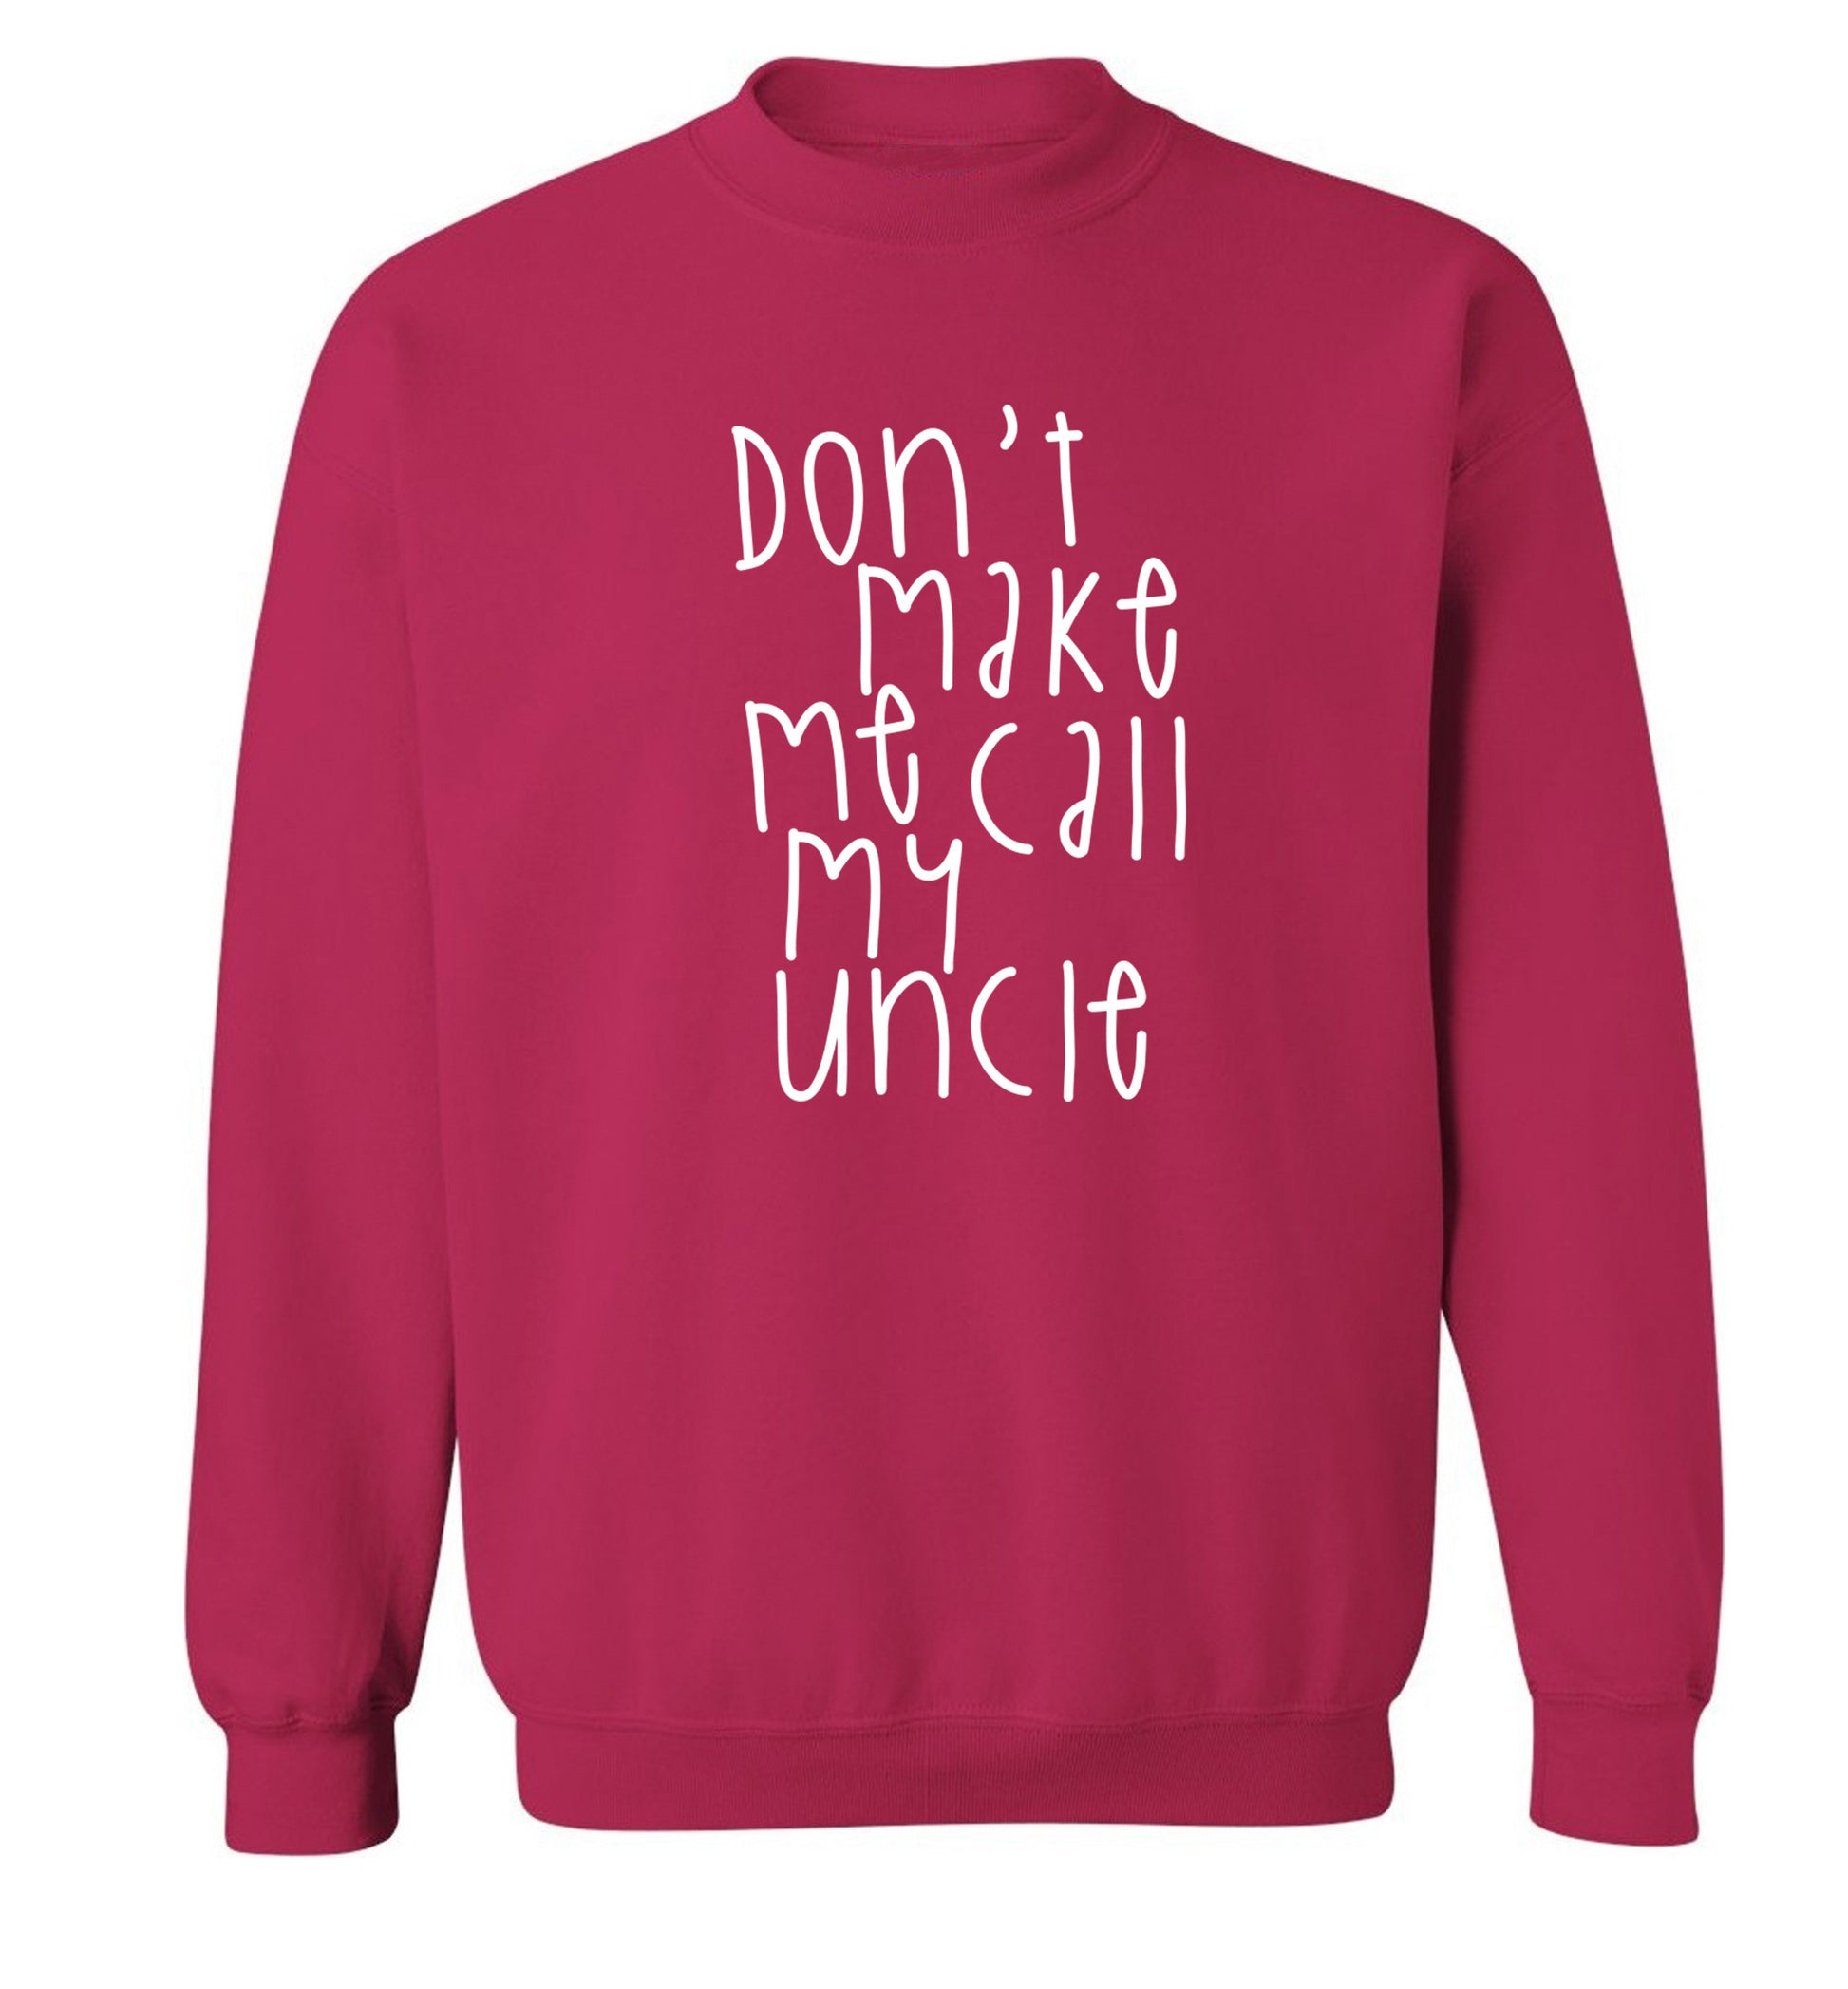 Don't make me call my uncle Adult's unisex pink Sweater 2XL